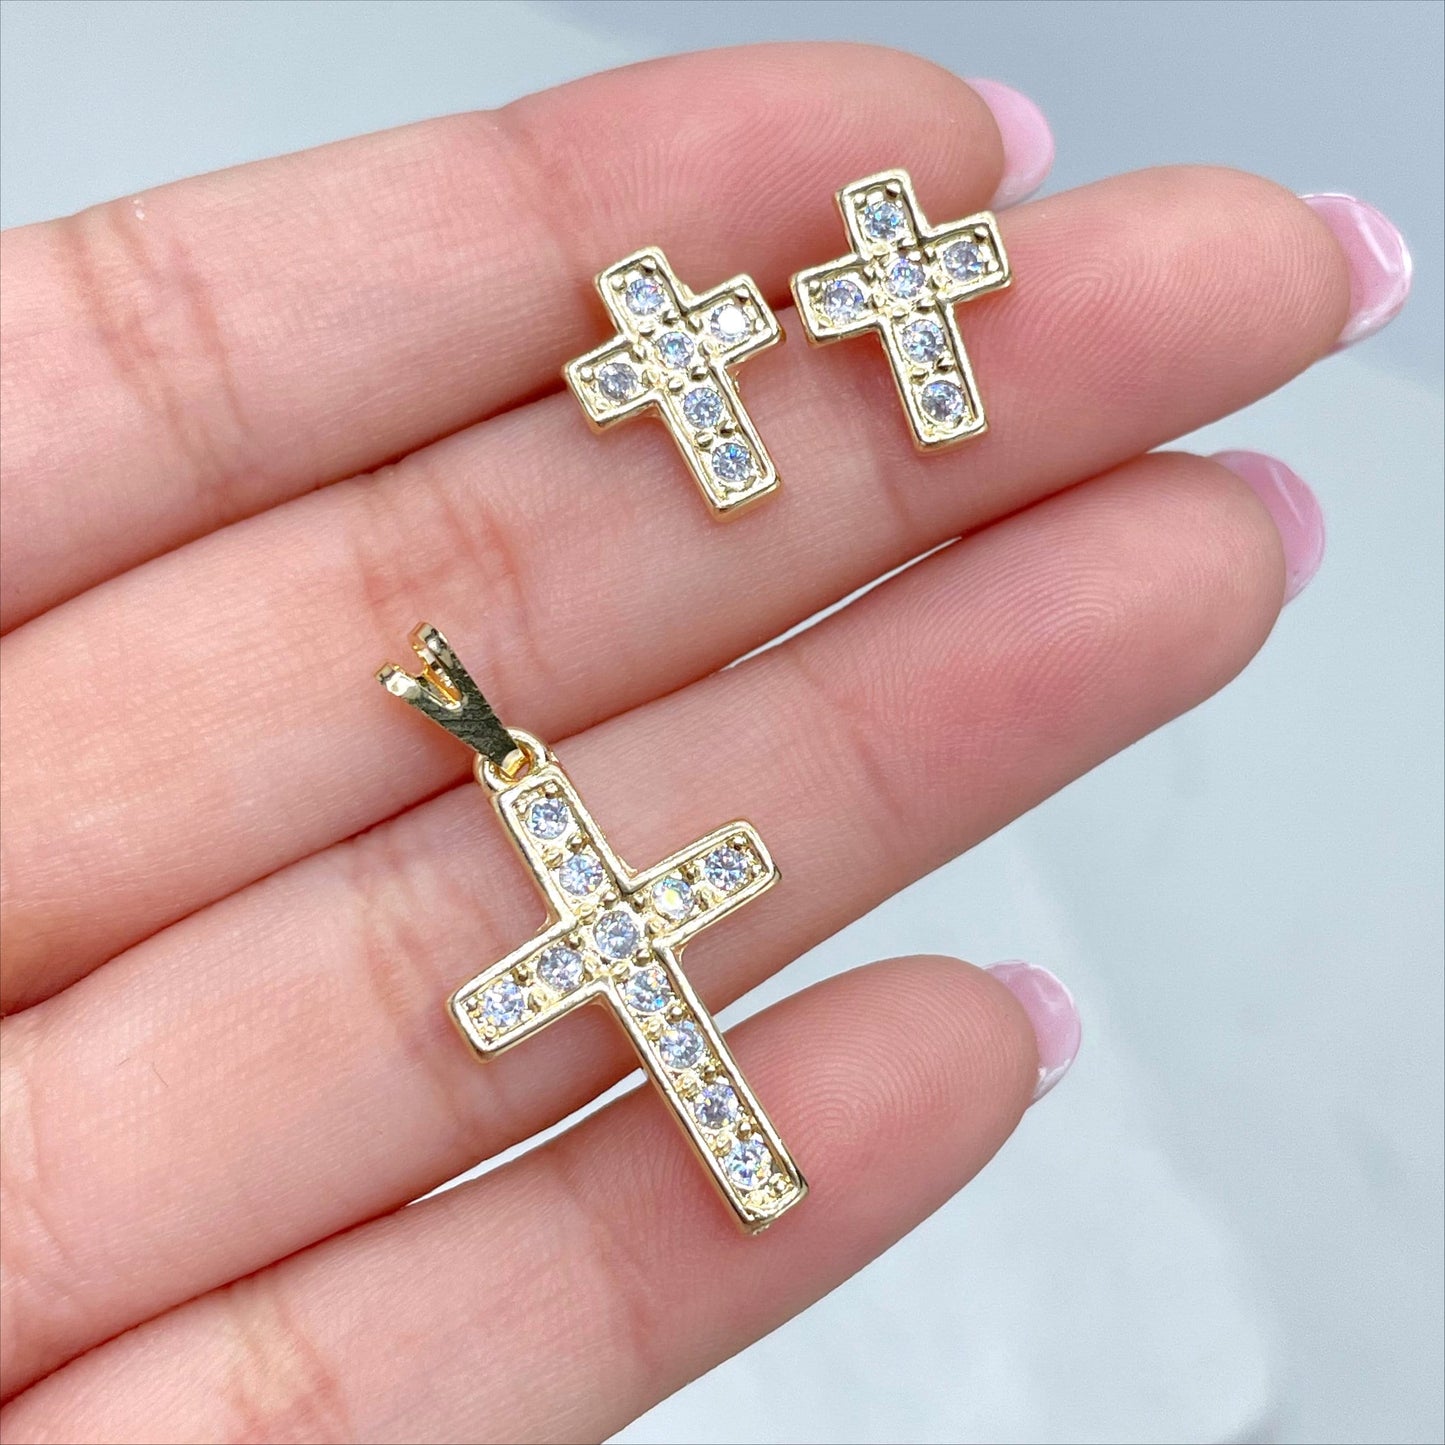 18k Gold Filled 2mm Curb Link Chain with Cubic Zirconia Cross Stud Earrings and Pendant, Wholesale Jewelry Making Supplies